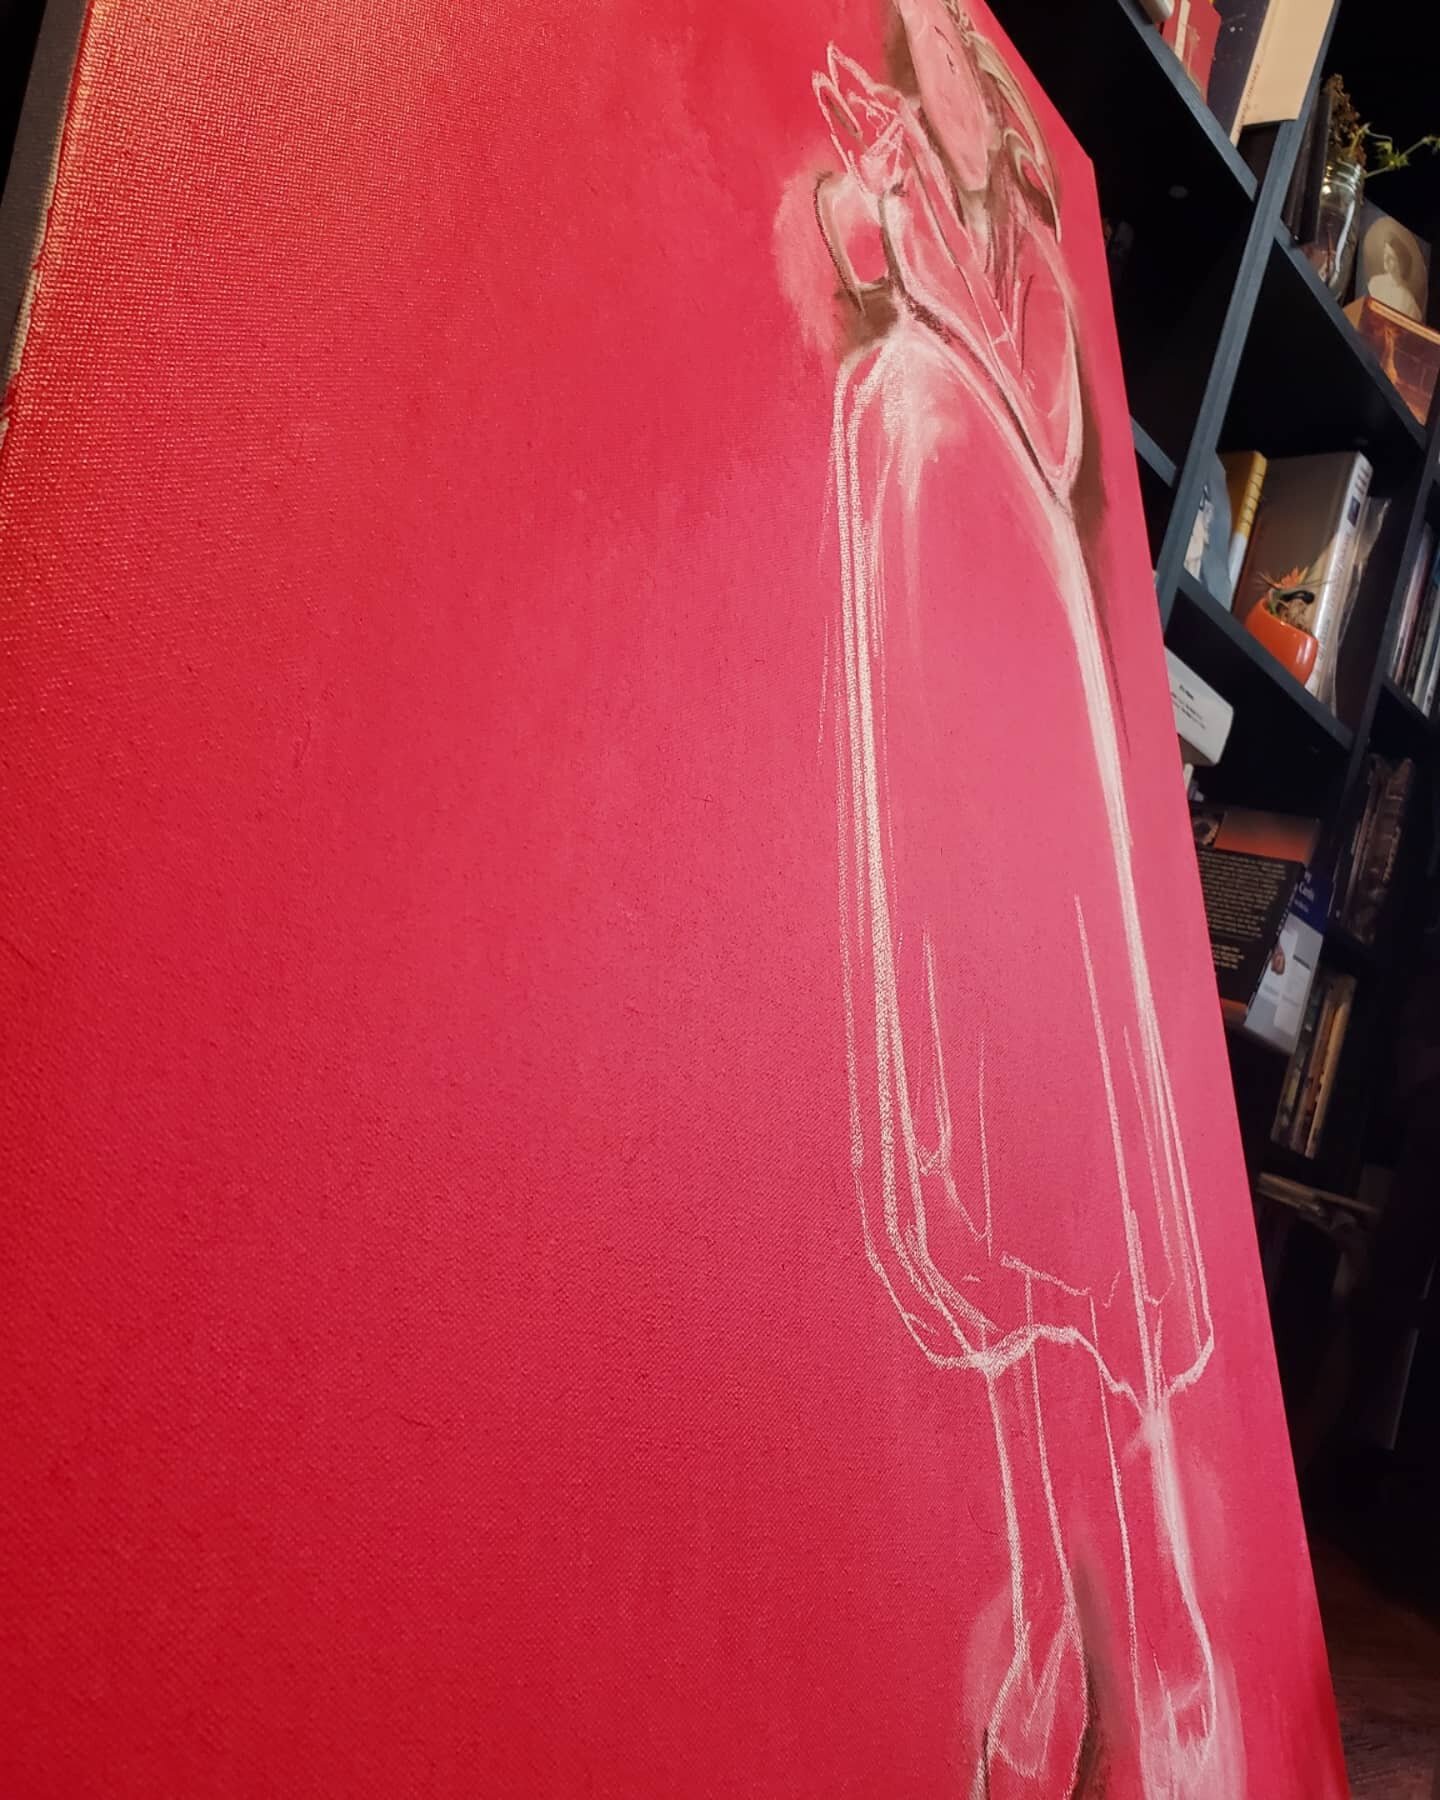 Preliminary ideas arriving on red ground. Prepare yourself for all the green that will soon make its way in layers. #wip #newpainting #commission #oilpainting #underpainting #pan #goddess